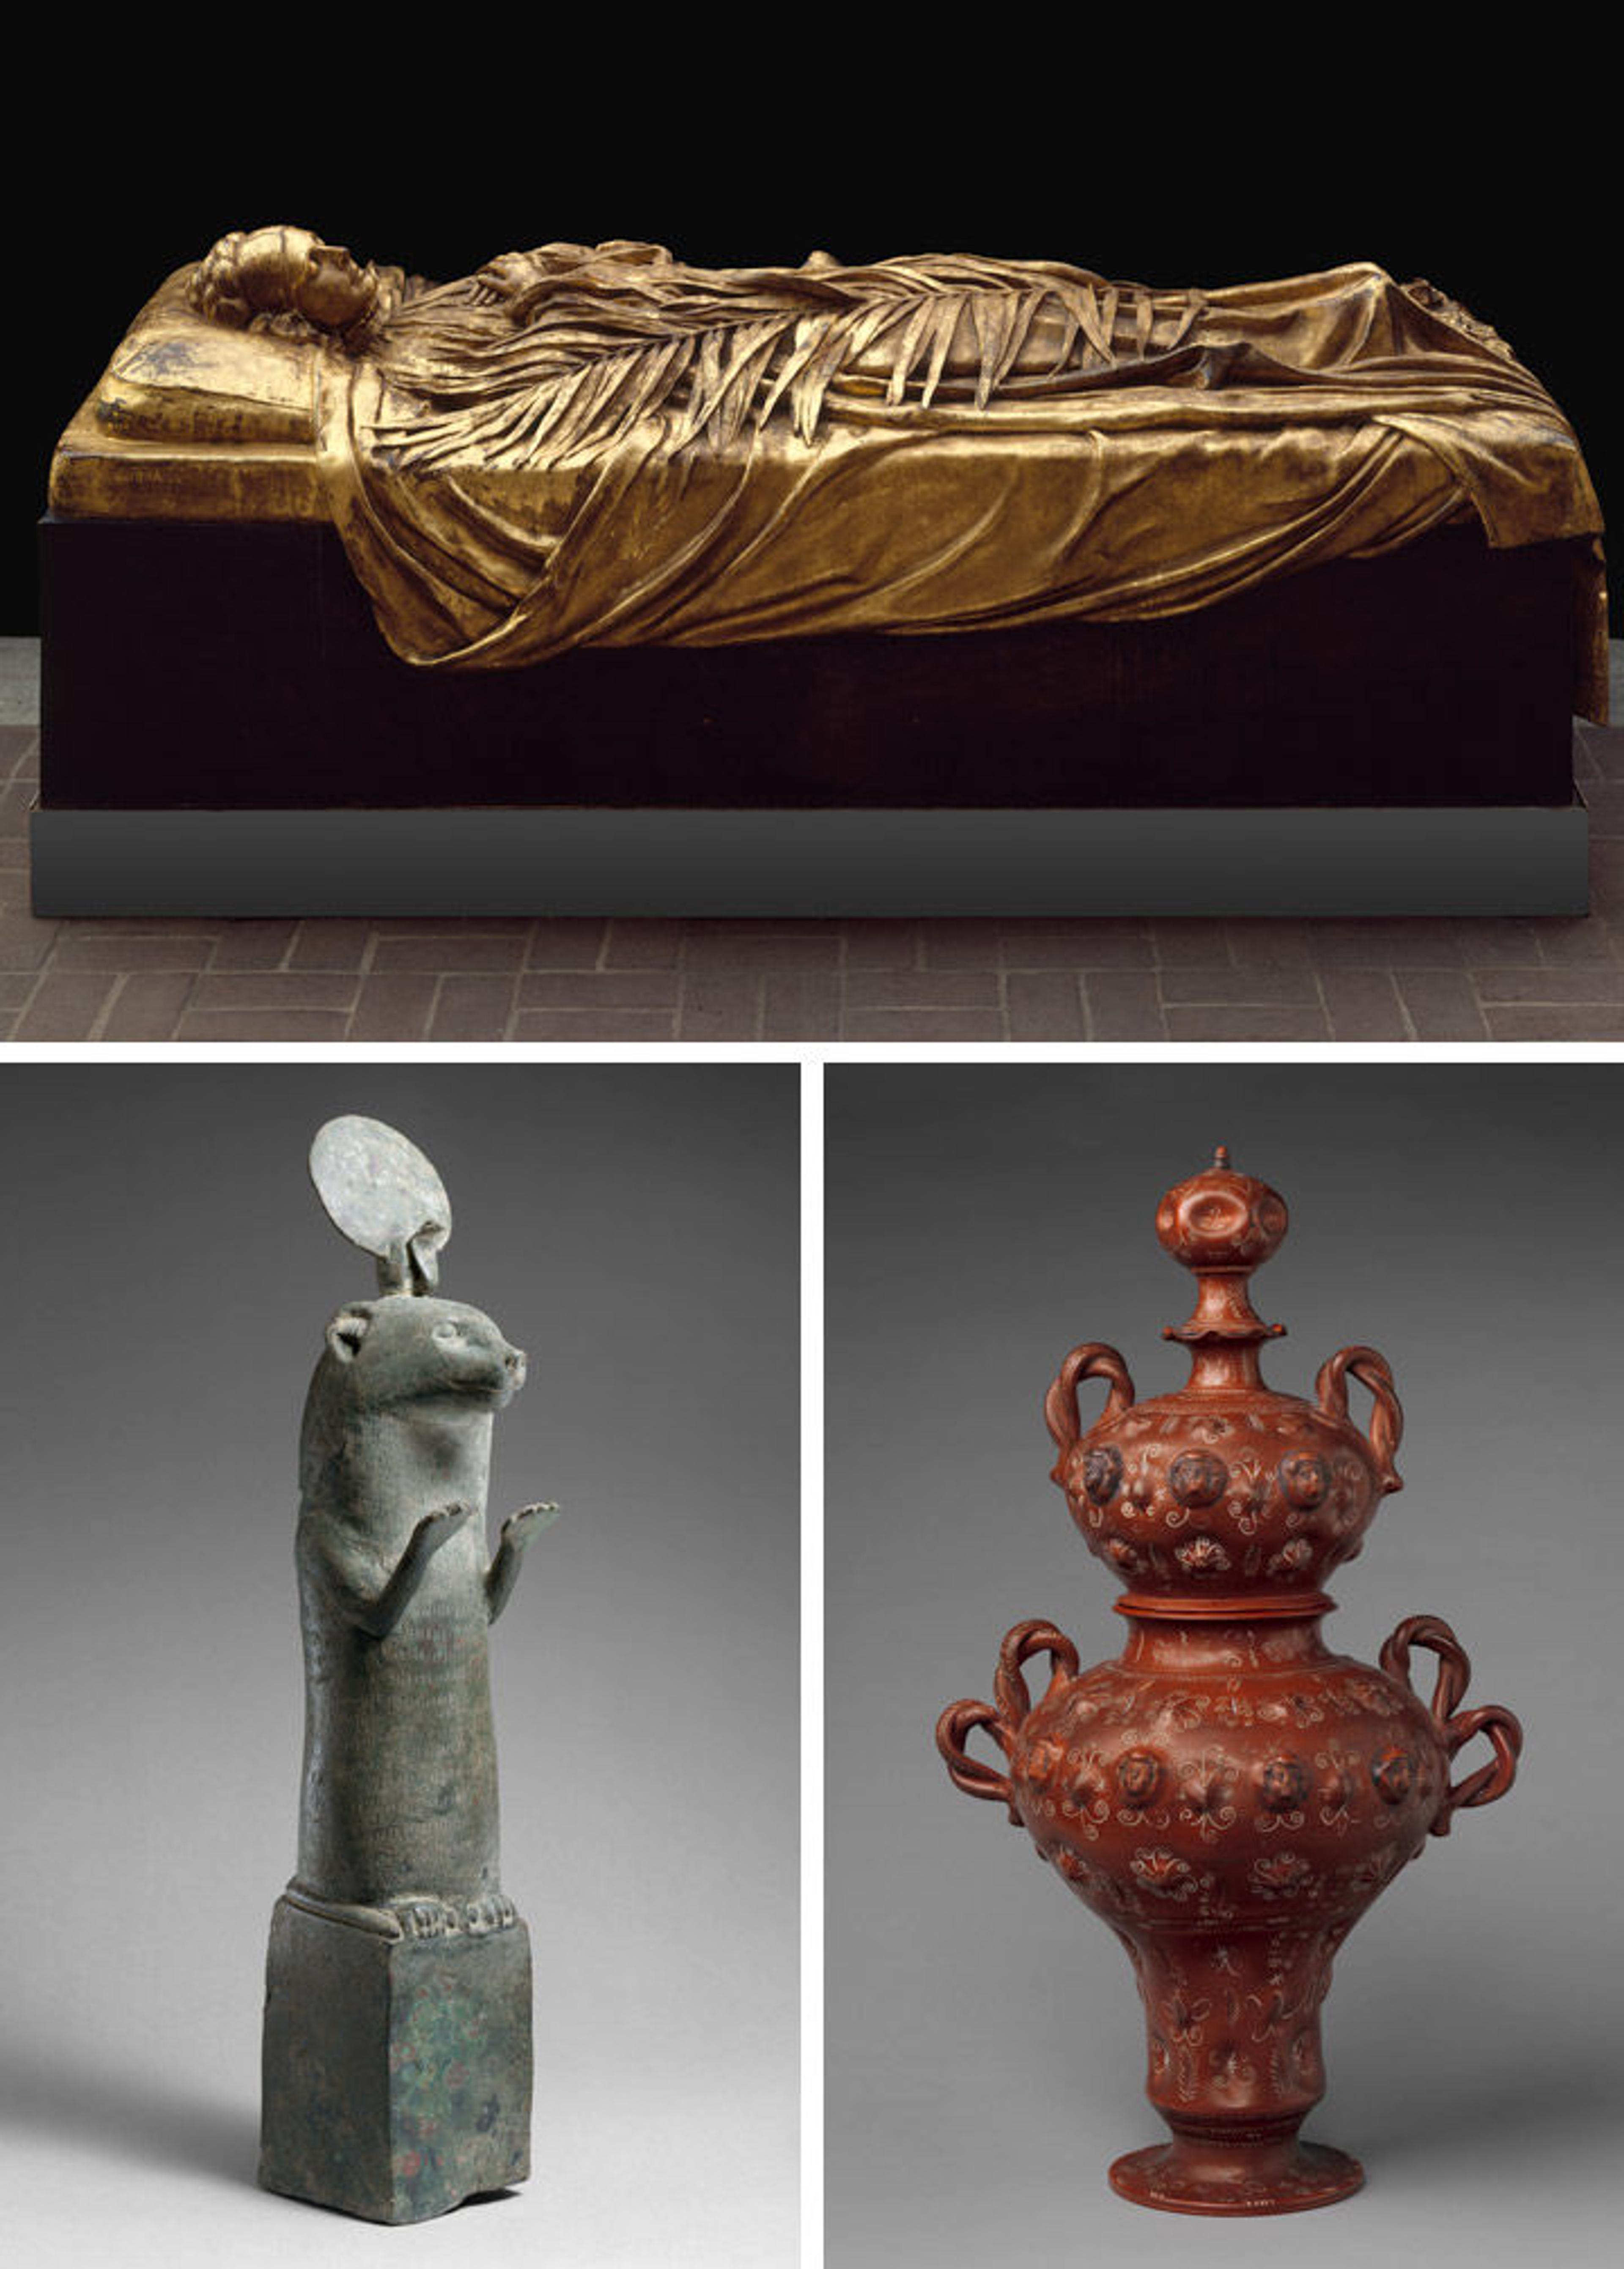 View of three objects from The Met collection: tomb effigy of Elizabeth Boott Duveneck (top); a sculpture of an otter from Ancient Egypt (bottom left); and a clay vase from Mexico (bottom right)